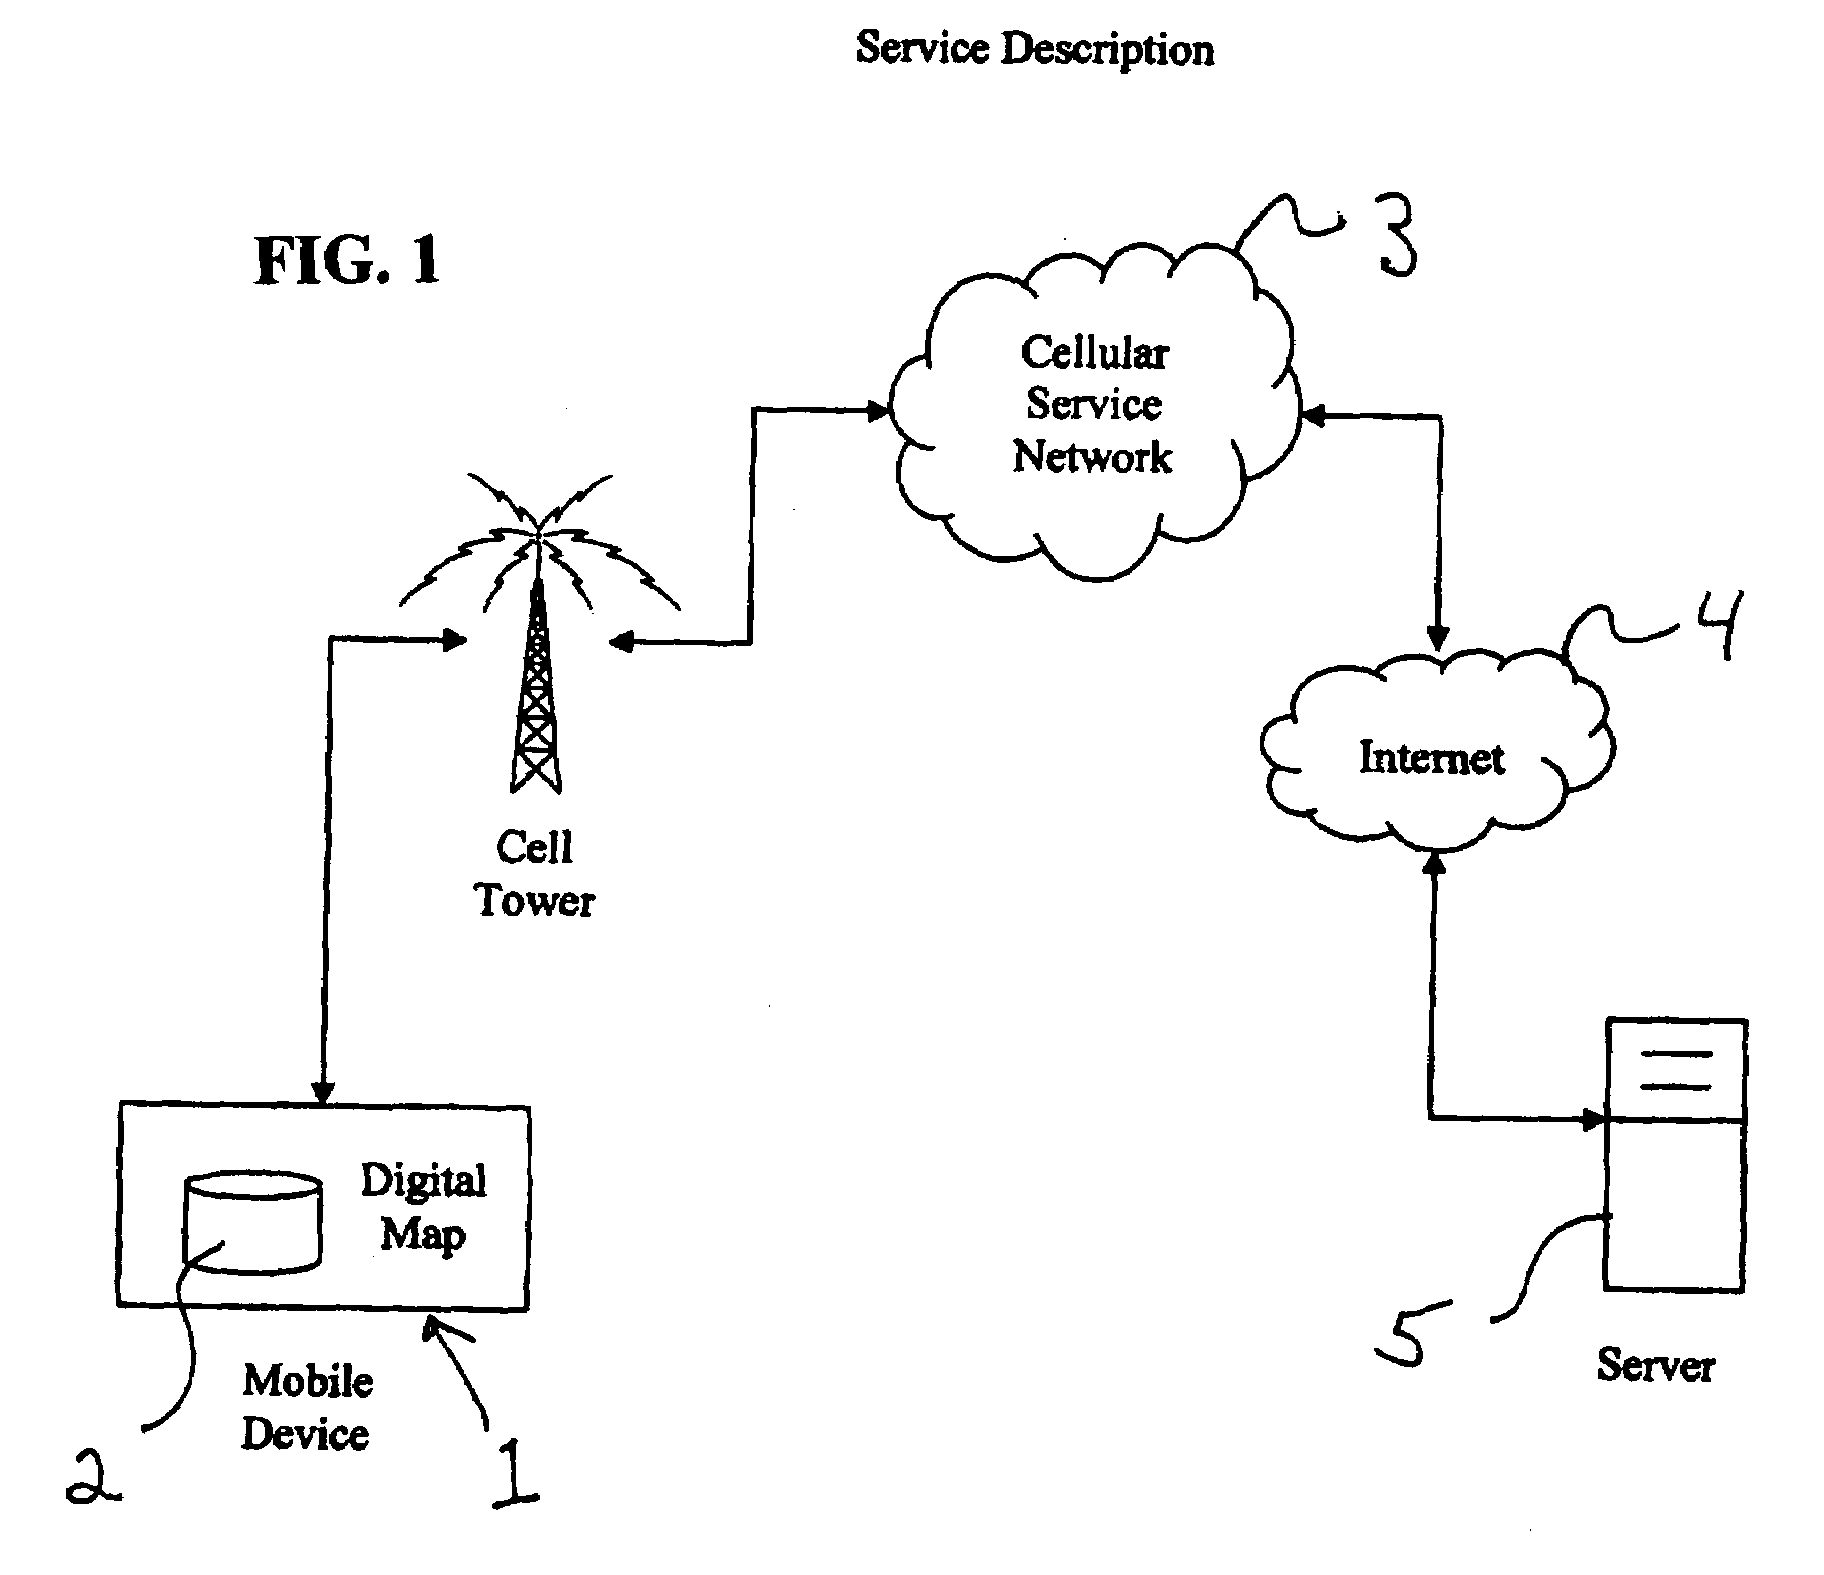 System and method for providing directions